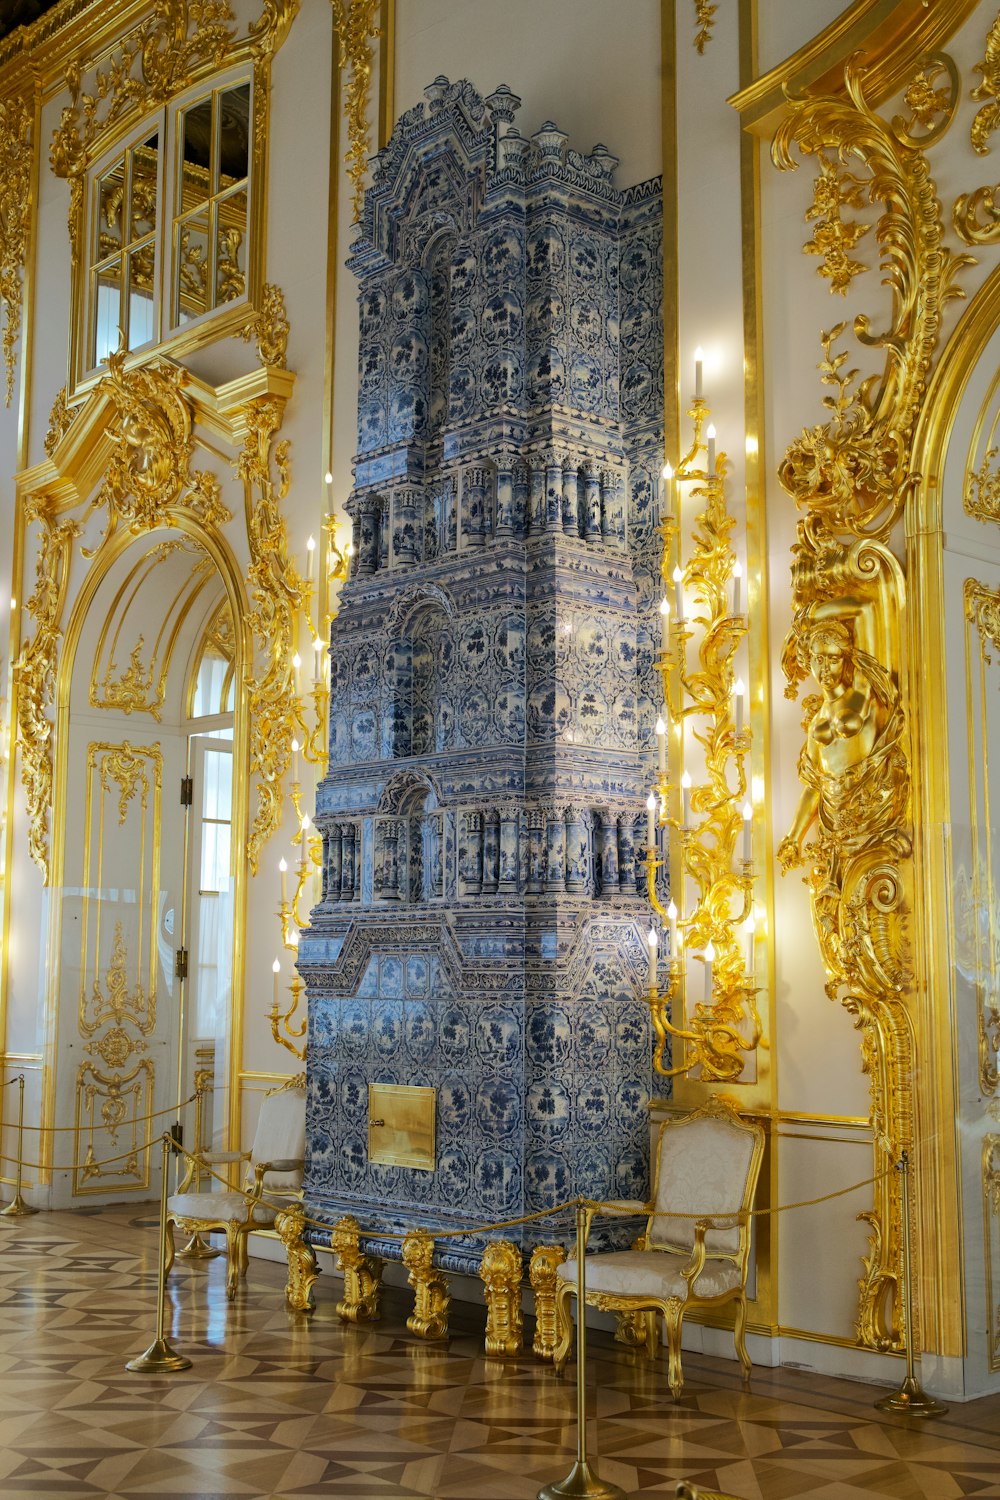 a very ornate room with a very tall tower